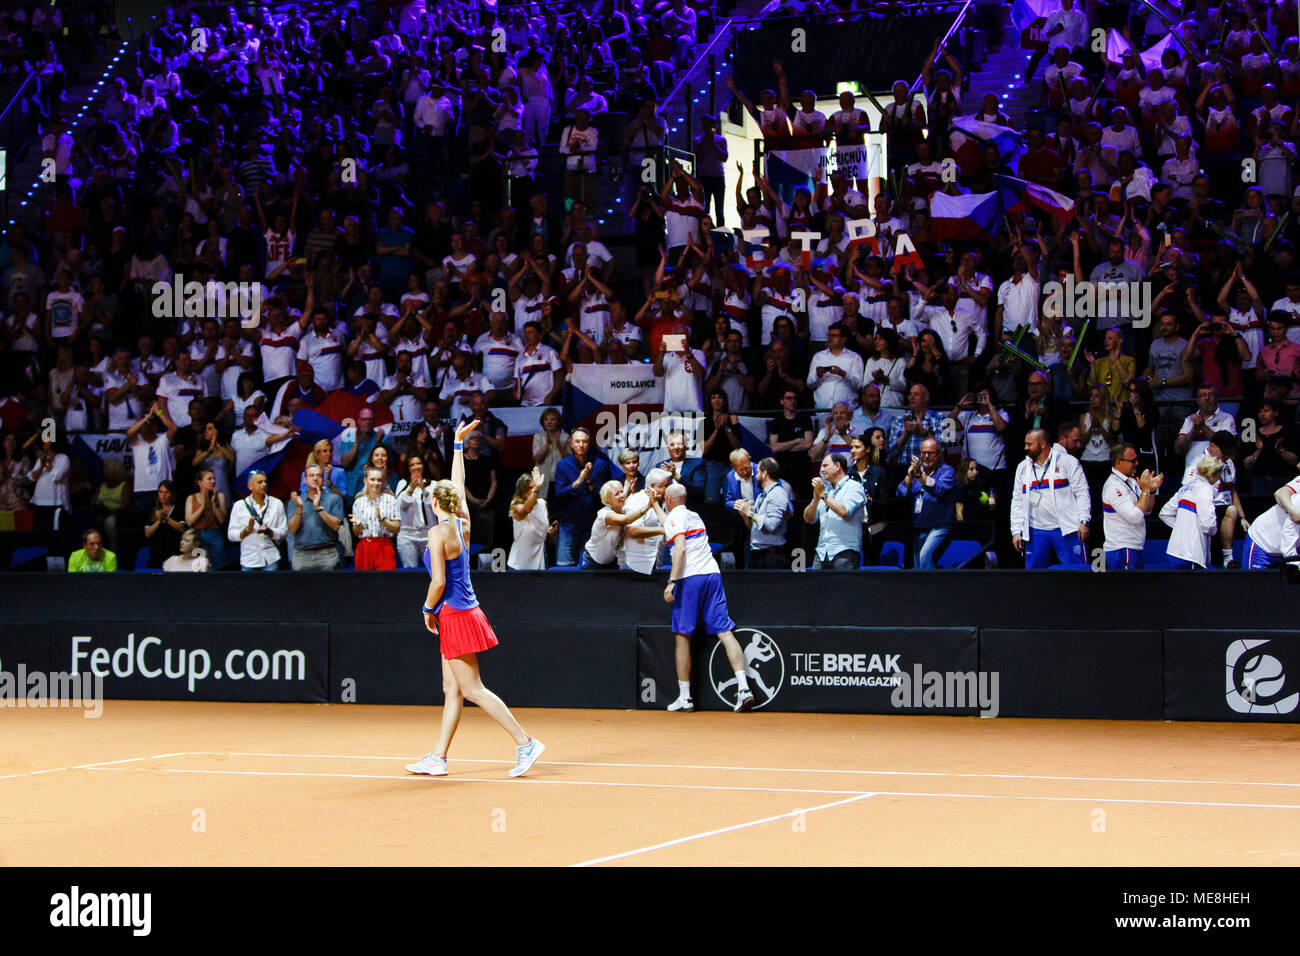 Czech tennis player Petra Kvitova in action during the Fed Cup semifinals against Germany. Stock Photo